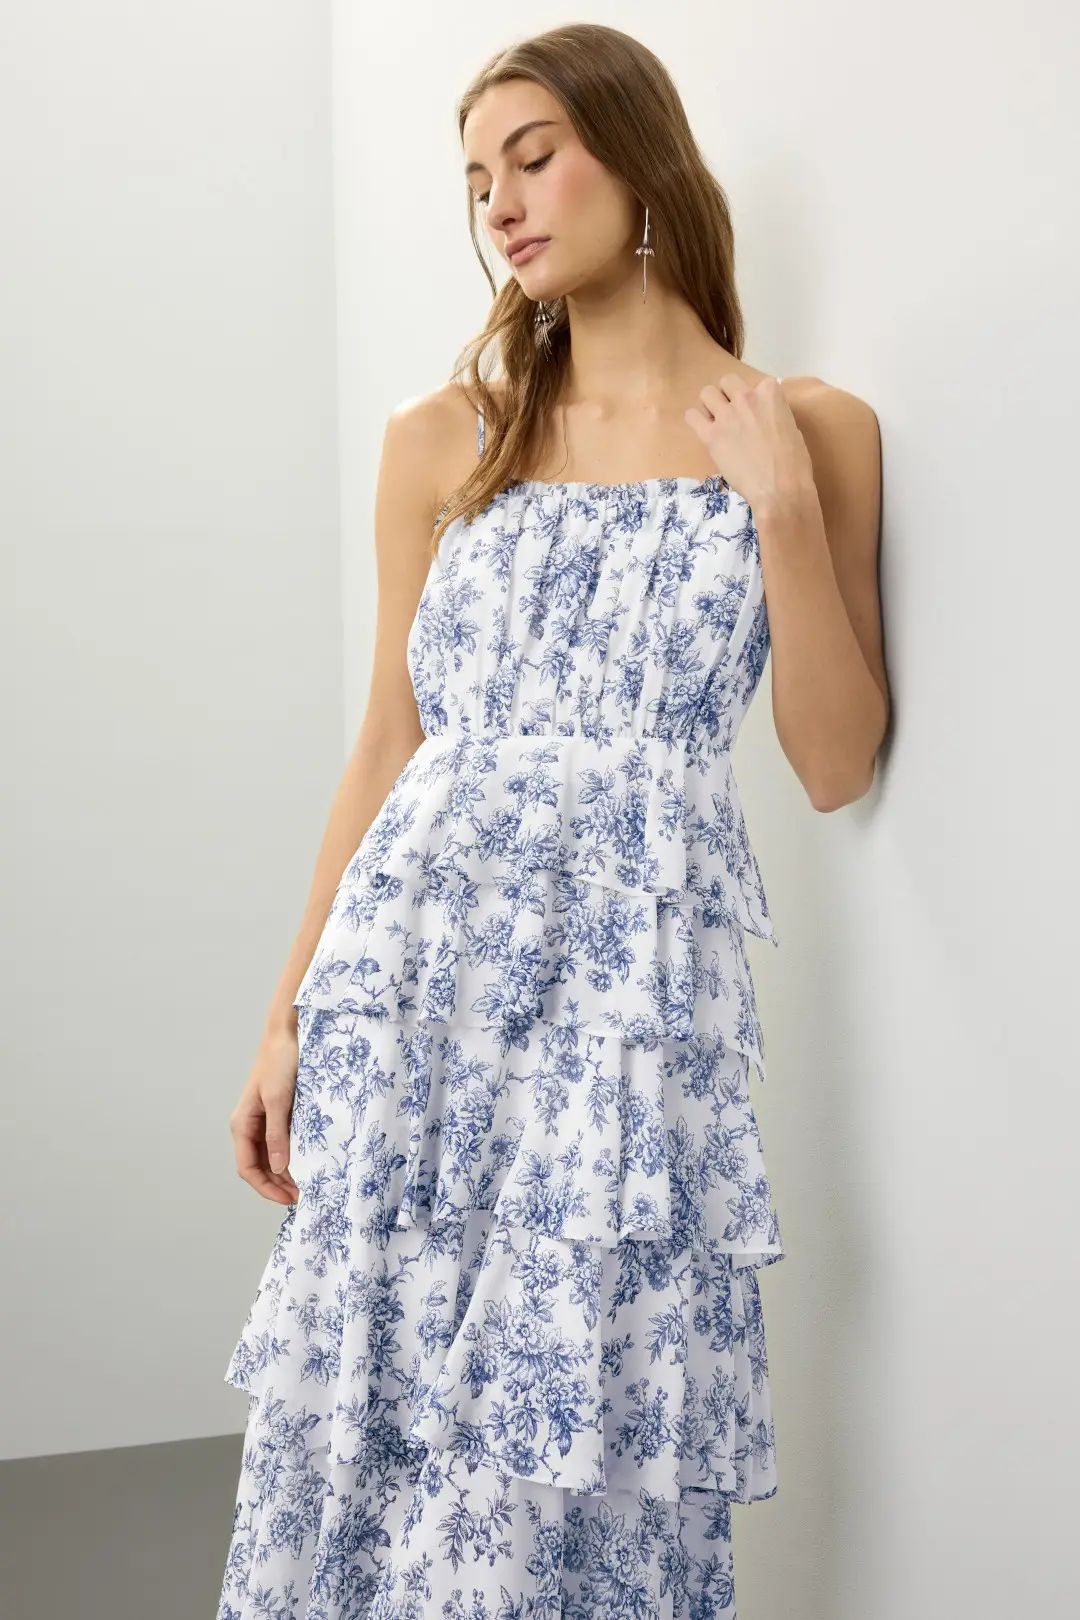 Jason Wu Collective Navy Floral Tiered Dress | Rent the Runway